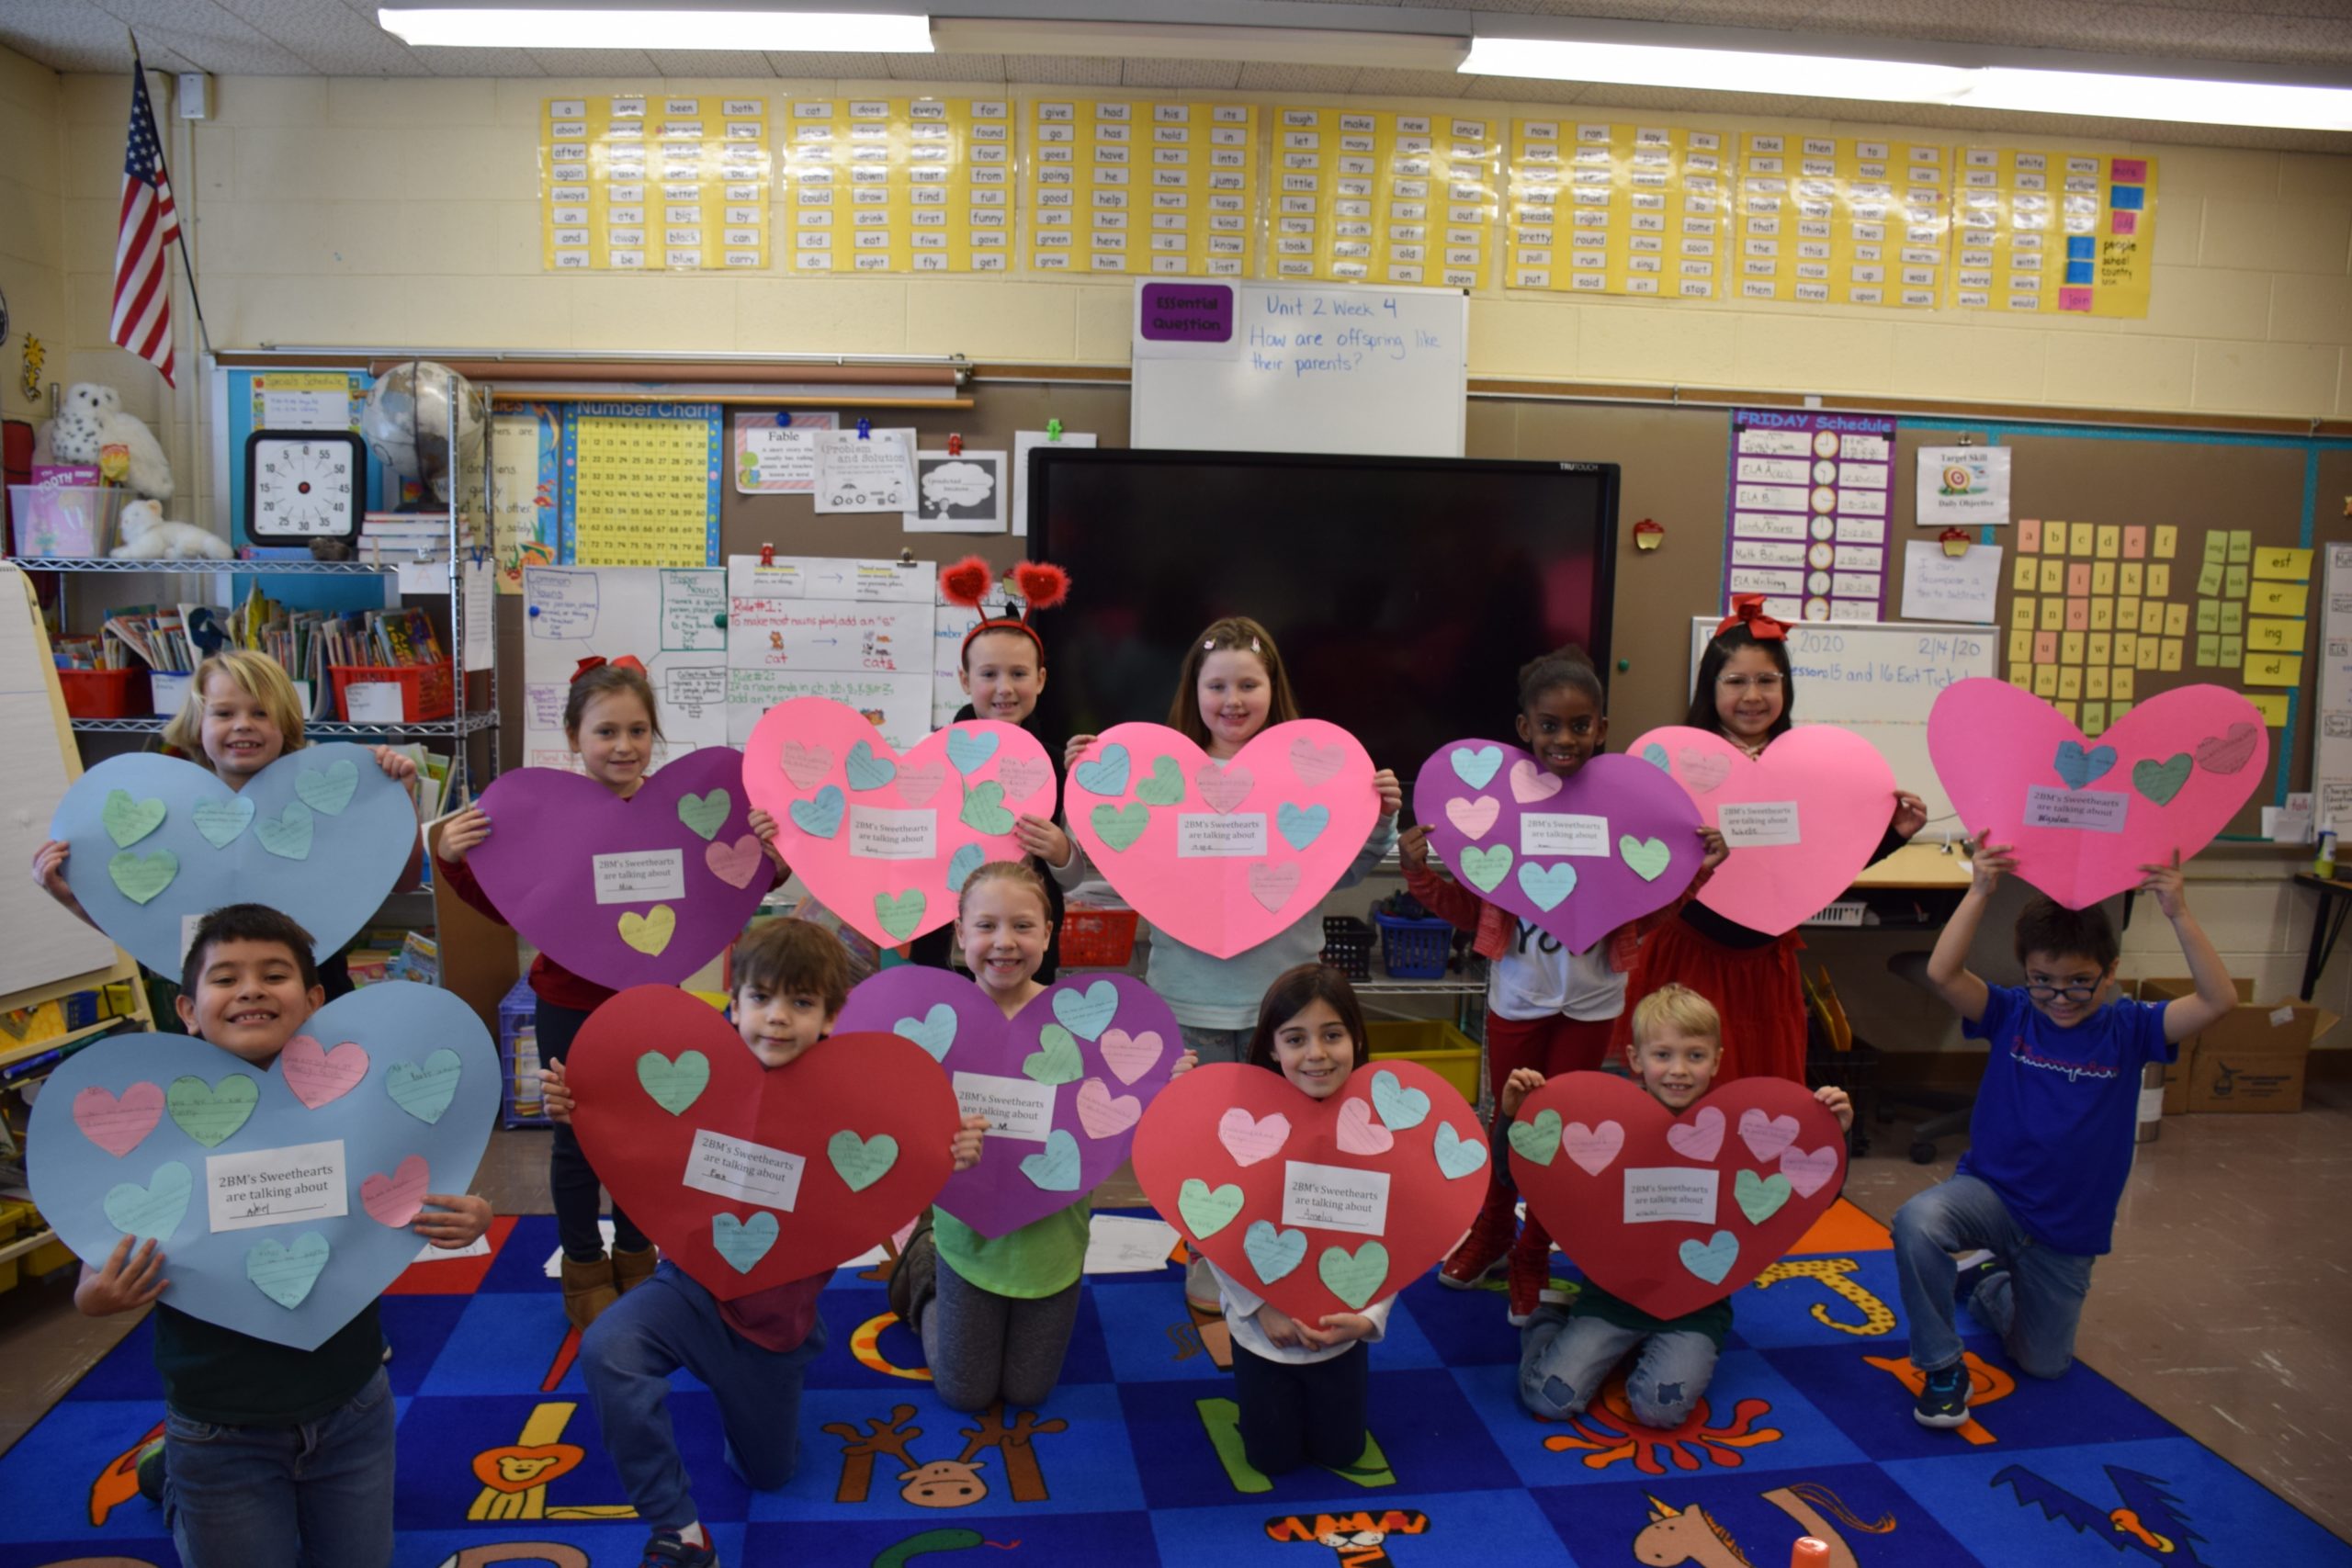 Westhampton Beach Elementary School students were full of kind words on Valentine’s Day as they completed a variety of educational projects. They made giant hearts filled with compliments to give to their classmates, designed Valentine’s Day cards and, at the kindergarten level, worked on their writing skills by drawing on hearts using the “at” word family, such as cat, bat, sat, and sight words.